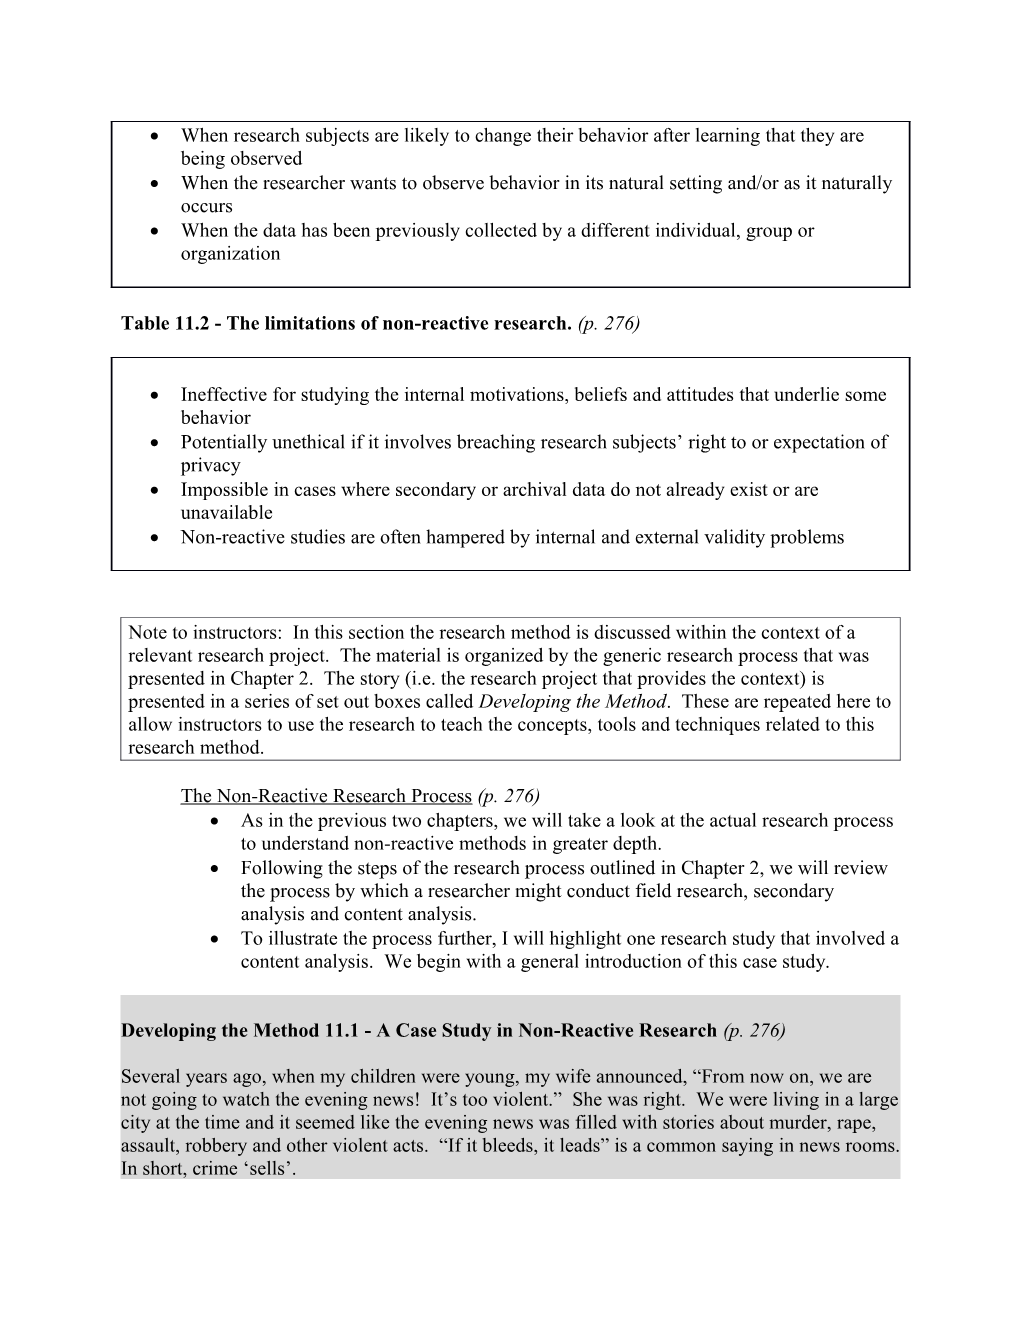 Chapter 11 Non-Reactive Research Methods (Pp. 269-295)